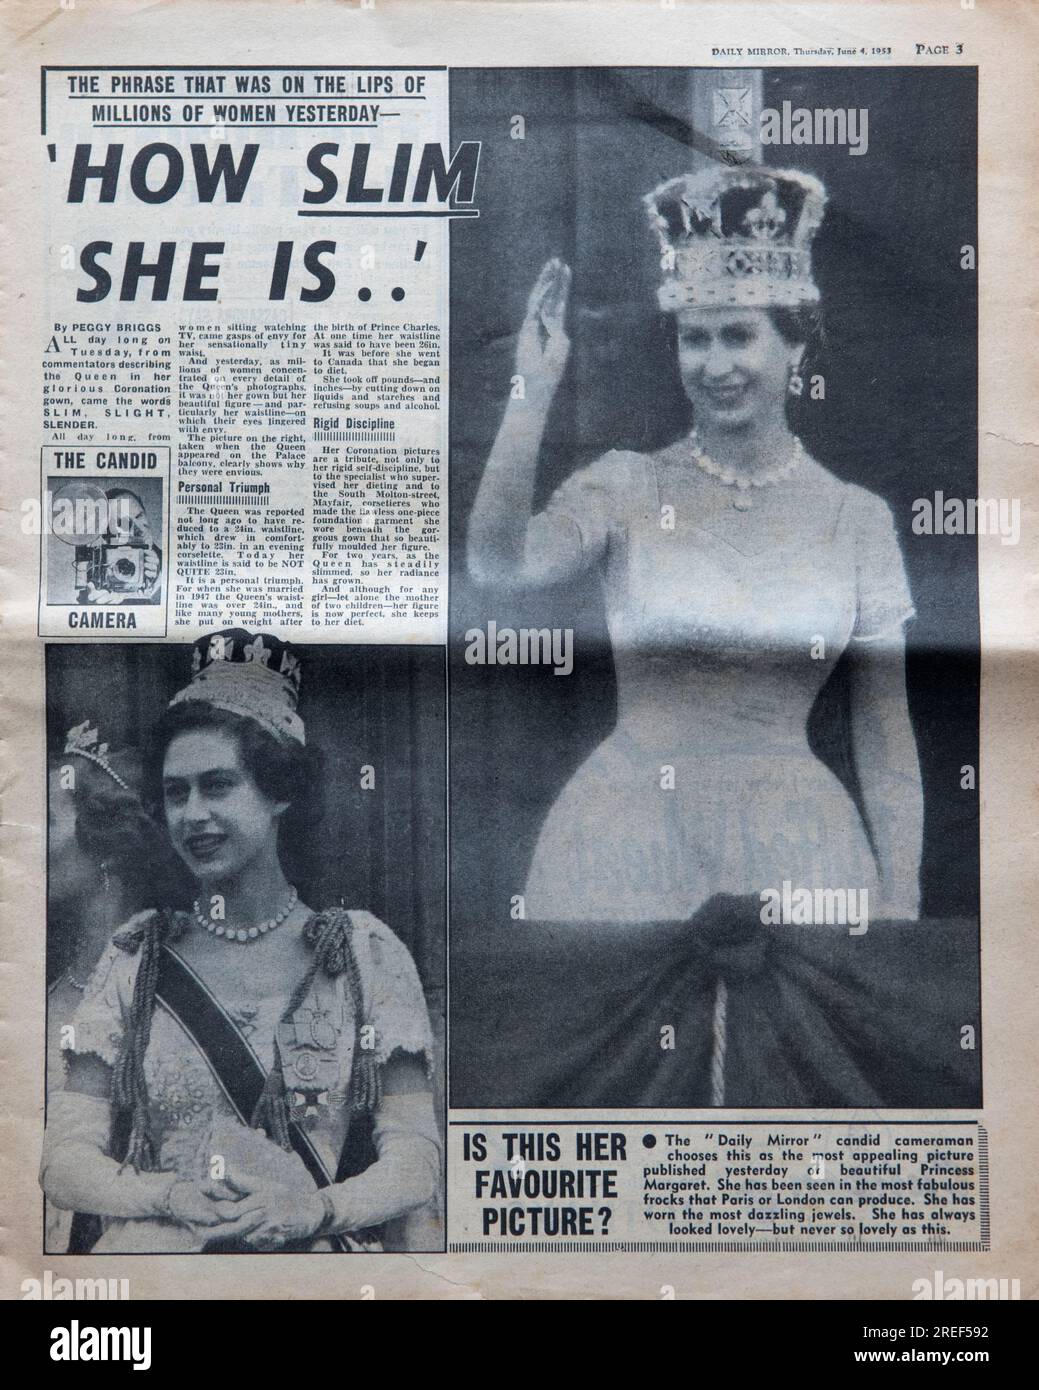 Queen Elizabeth II Coronation Special, 2nd June 1953. The Daily Mirror newspaper. front page news. Dated 3rd June 1953. An old worn used copy of a British tabloid newspaper. 1950s Britain UK. Stock Photo